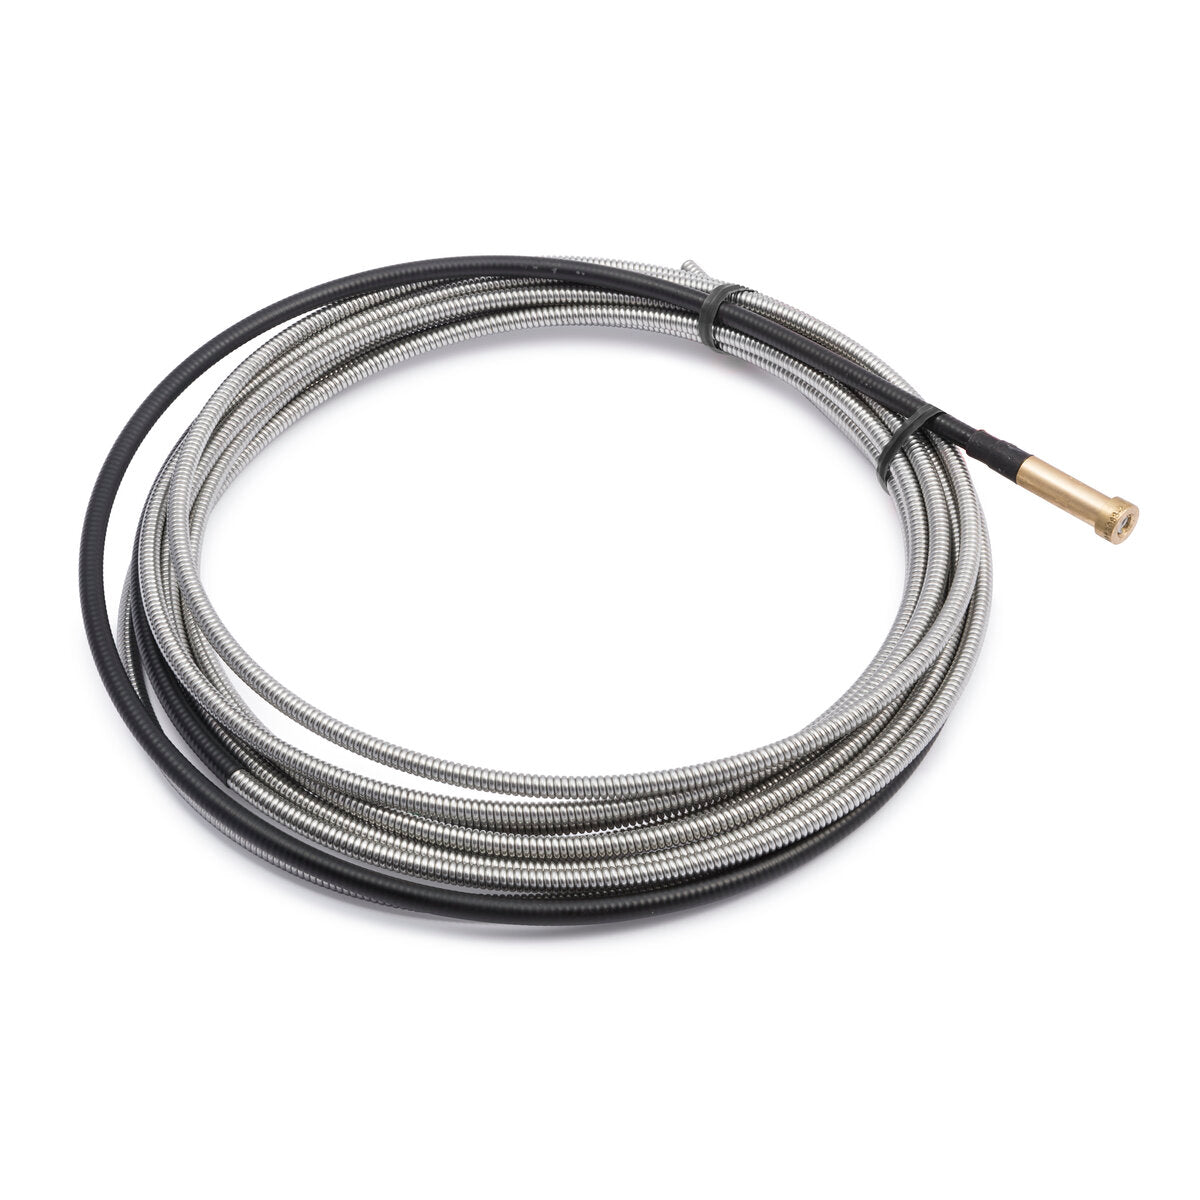 Lincoln Electric - Cable Liner .052-1/16 in (1.3-1.6 mm) 15 ft (4.6 m) - KP44-116-15